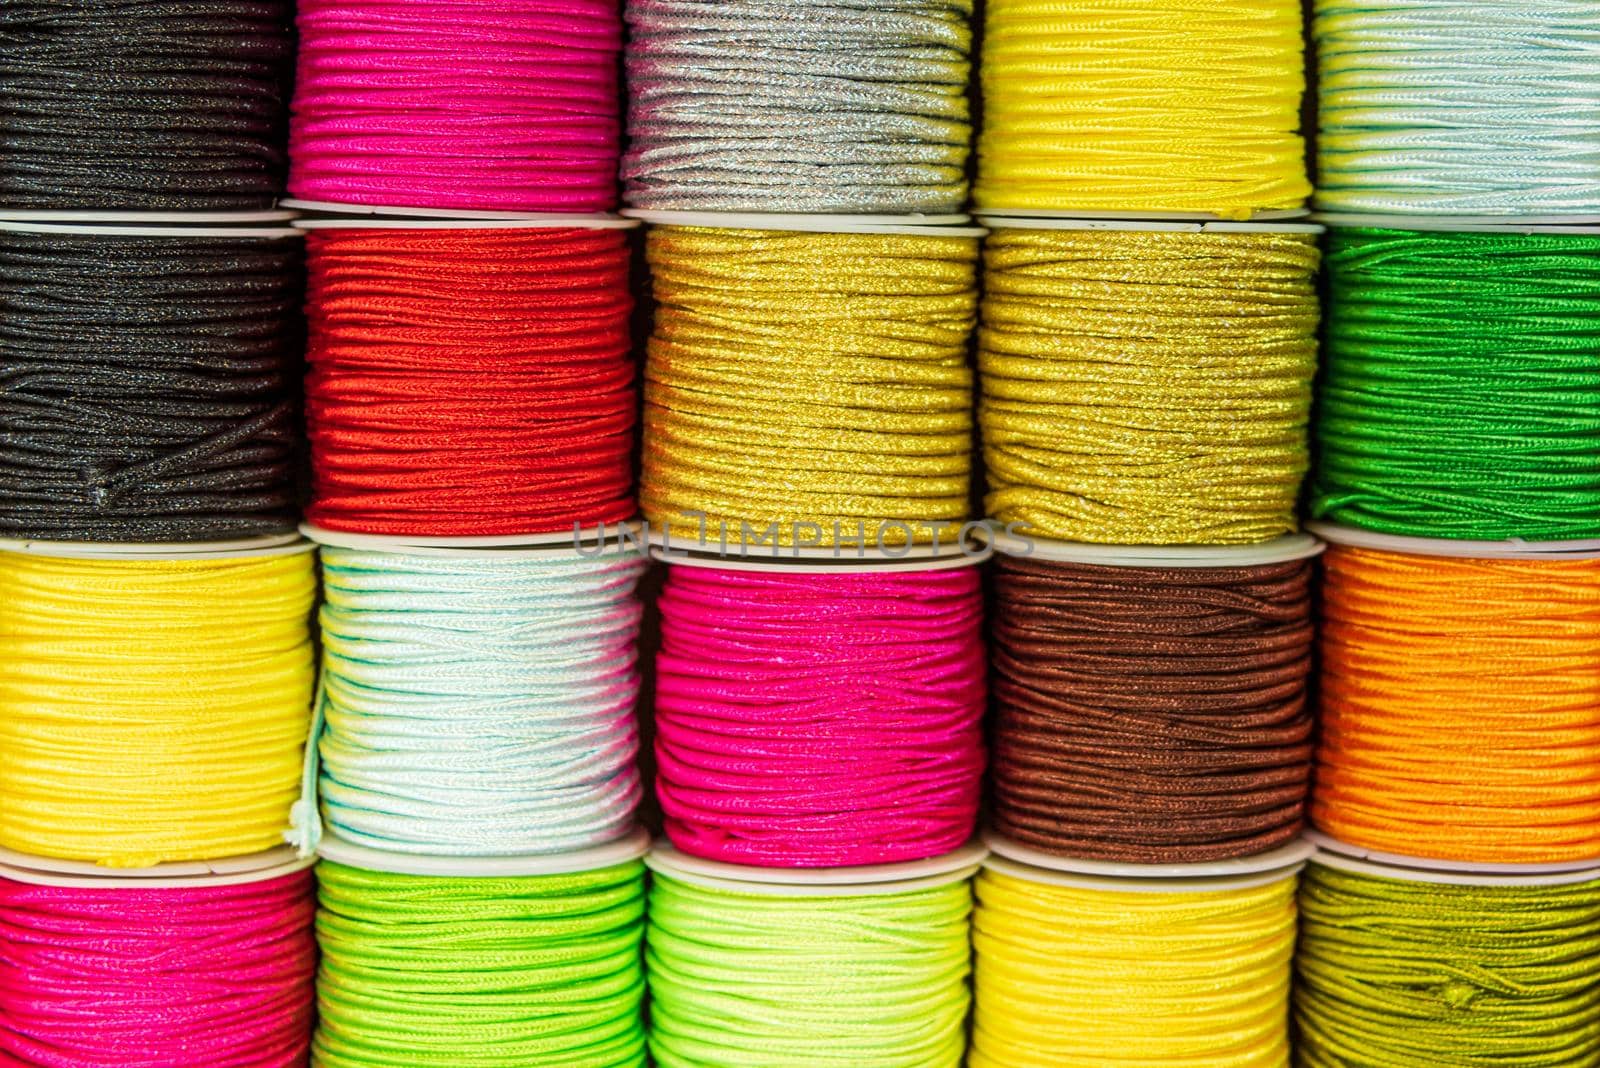 Ornamental threads for colorful jewelry making. High quality photo